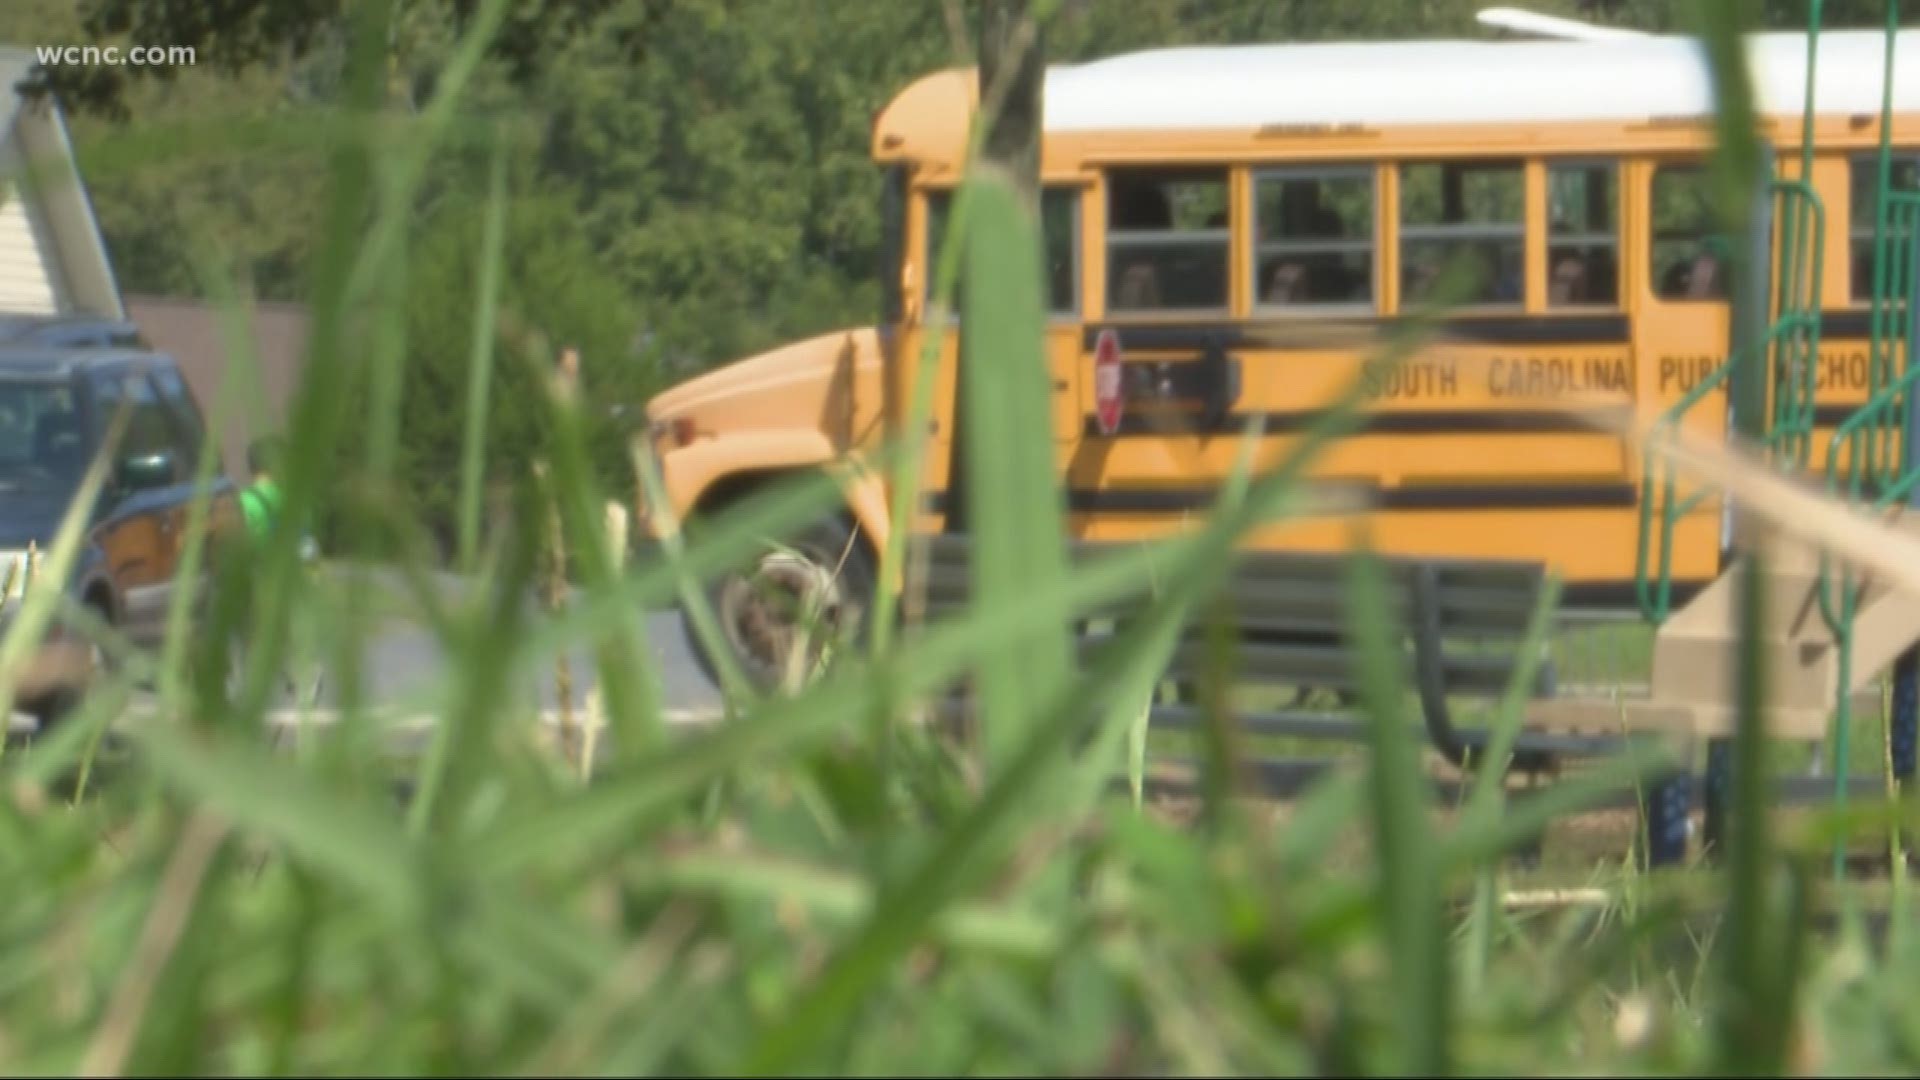 A mother is demanding the Rock Hill School District pay for her children's medical bills after she says her sons were hurt on the school bus.